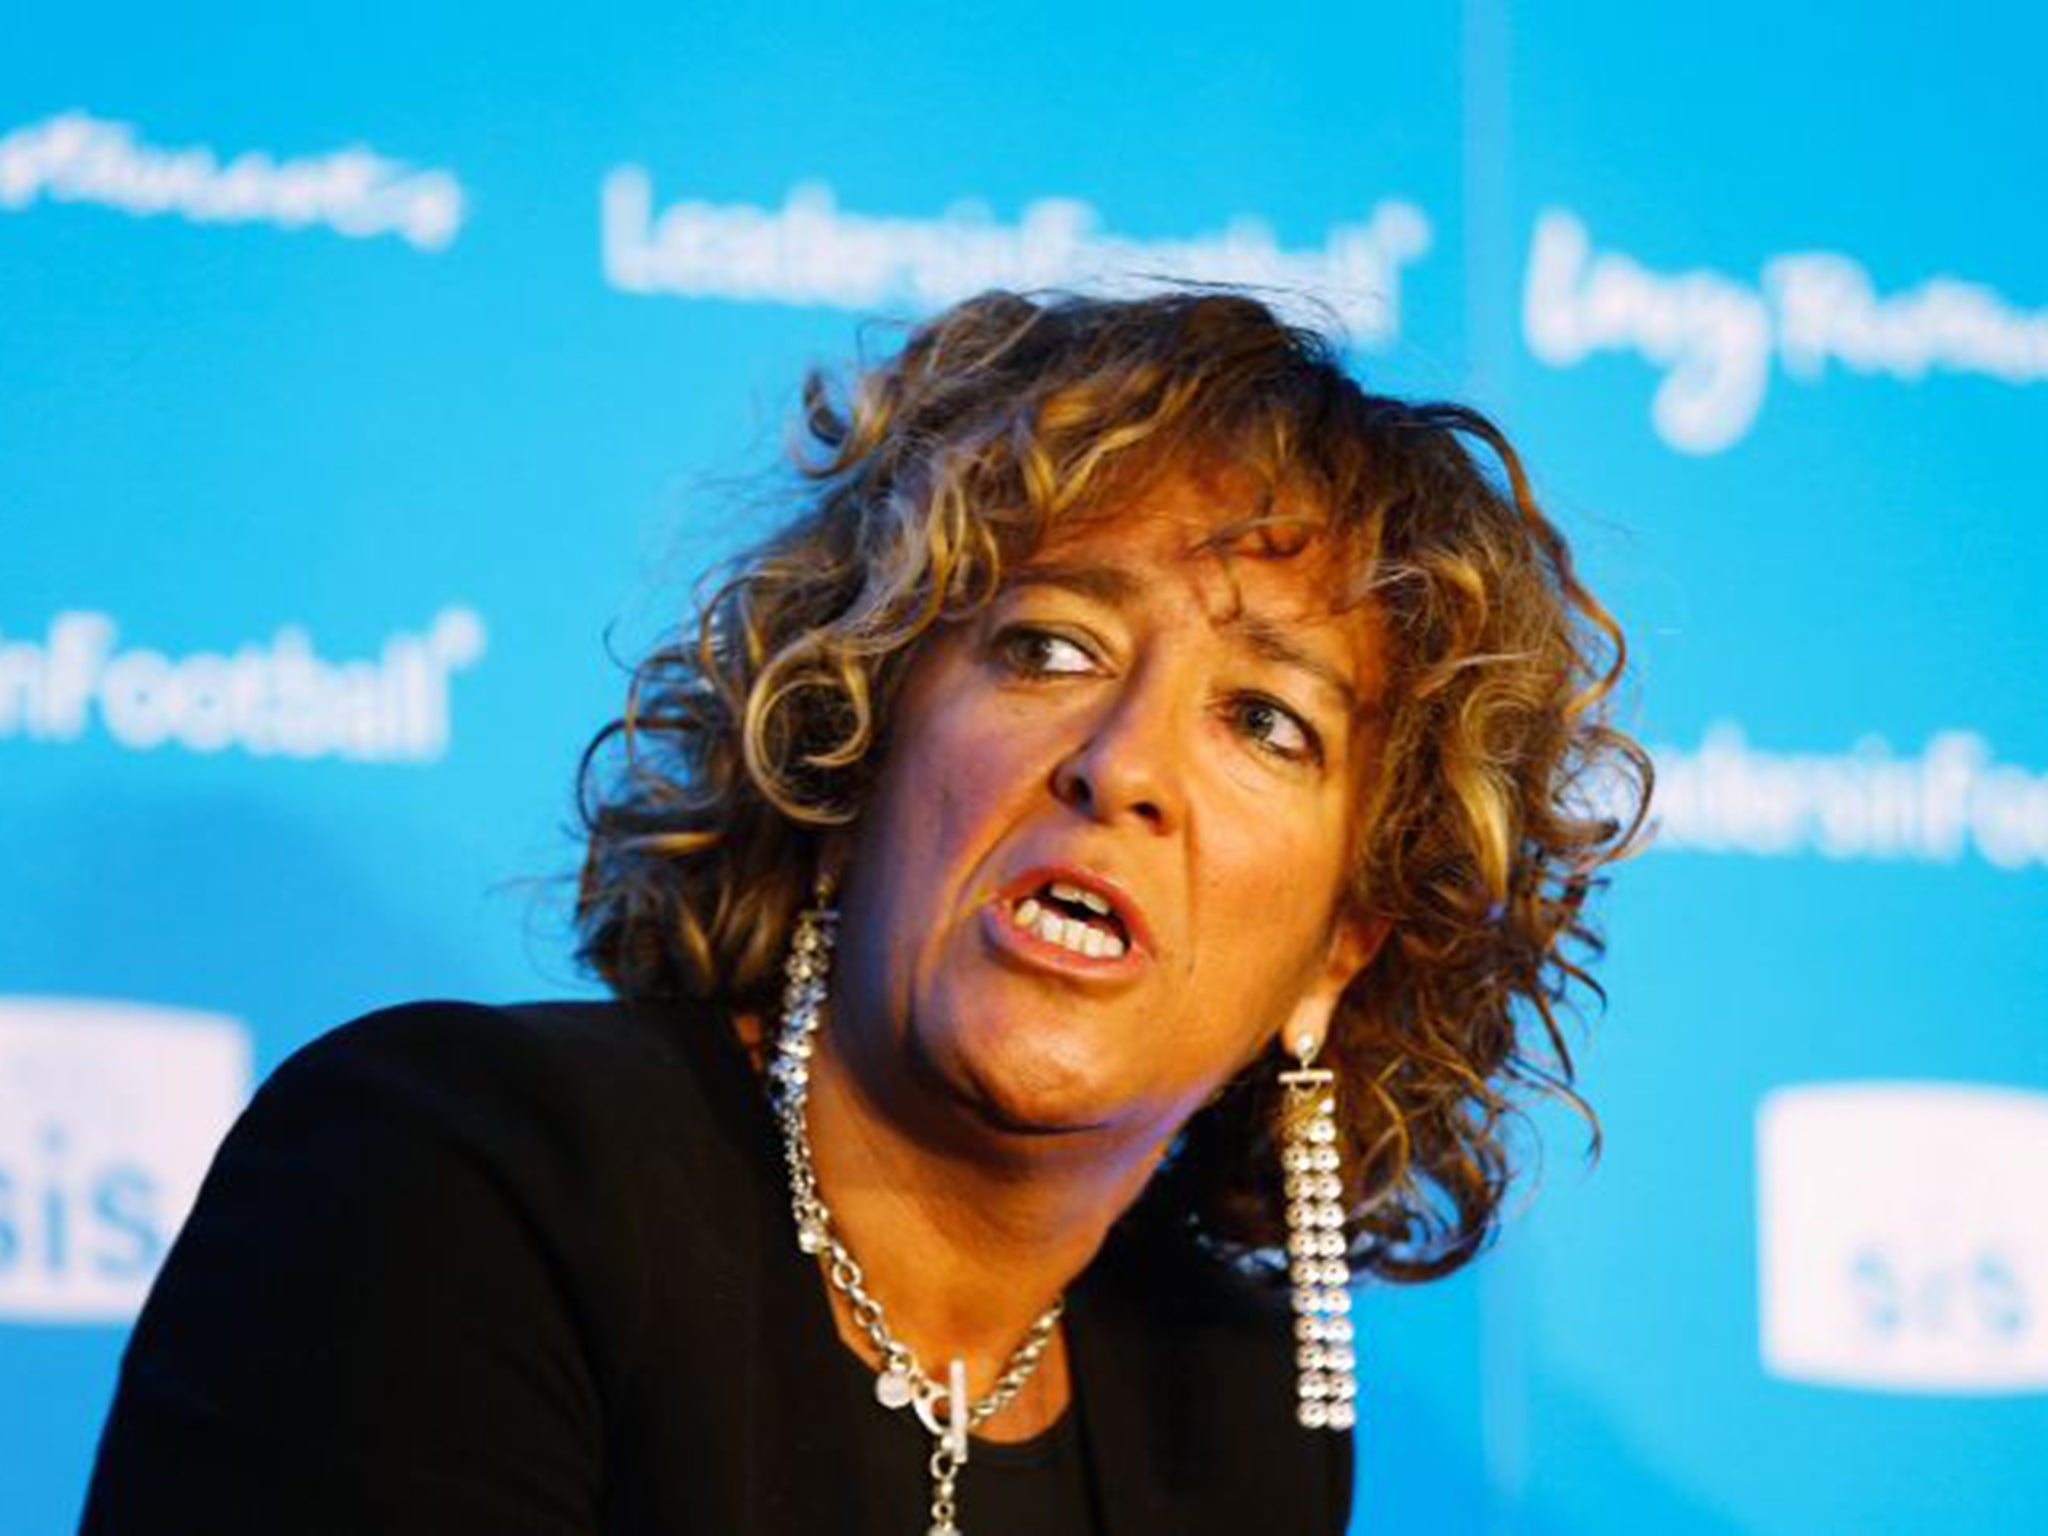 Heather Rabbatts upset her FA colleagues by supporting Eva Carneiro